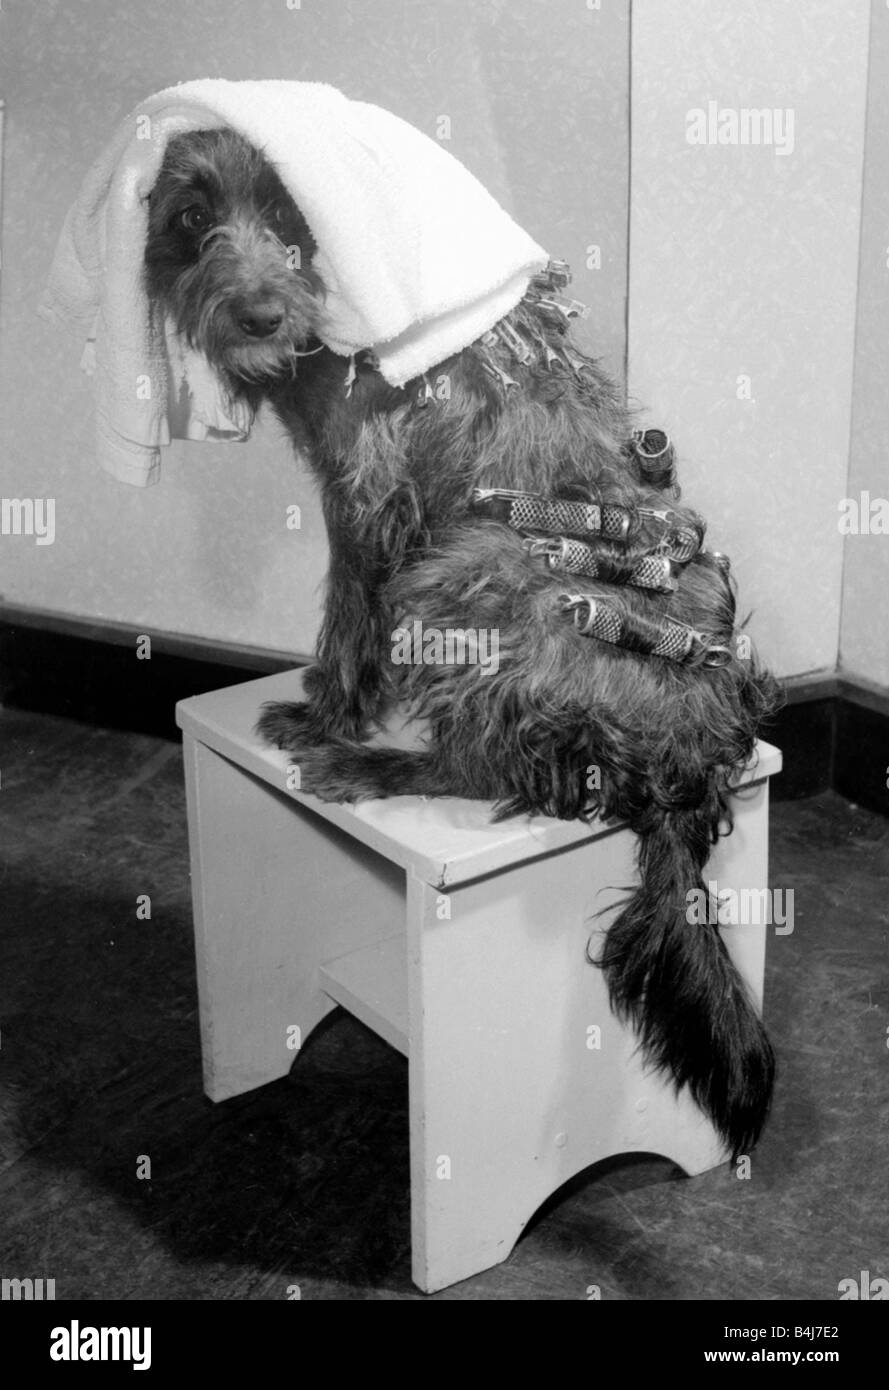 Judy a one year old mongrel went to Andre Bernard s hairdressing salon in Liverpool for a hair do Our Picture Shows Judy getting a perm with Curlers in her coat and a Towel covering her head Stock Photo